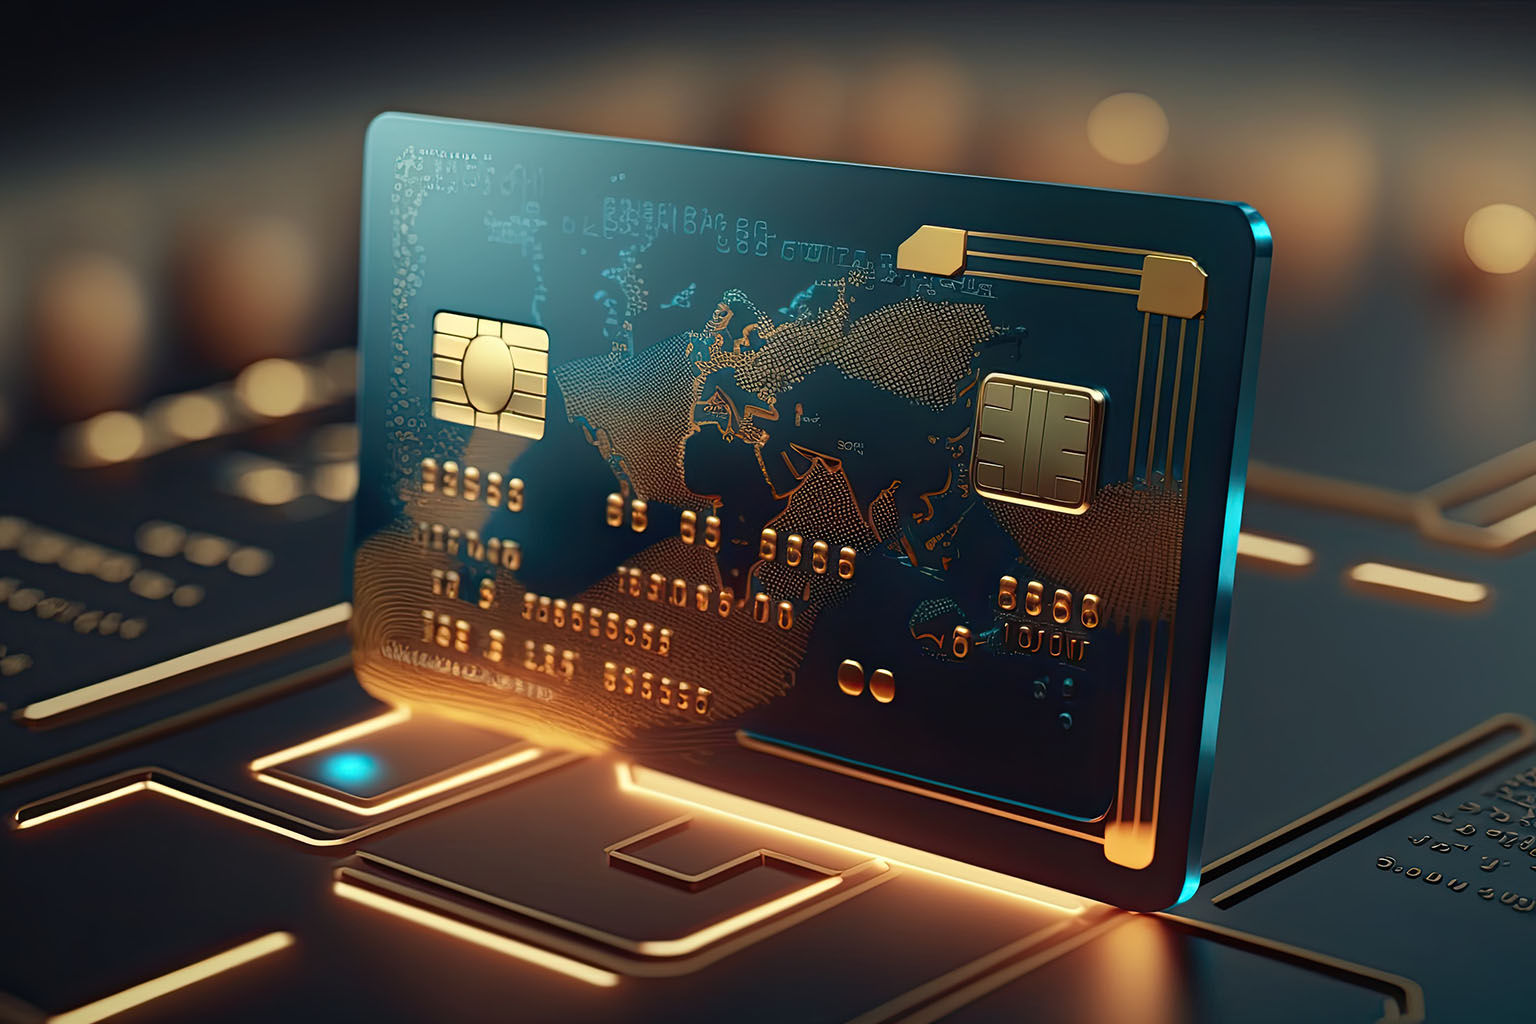 Credit card rendering symbolizing accounts payable with NetSuite accounting software